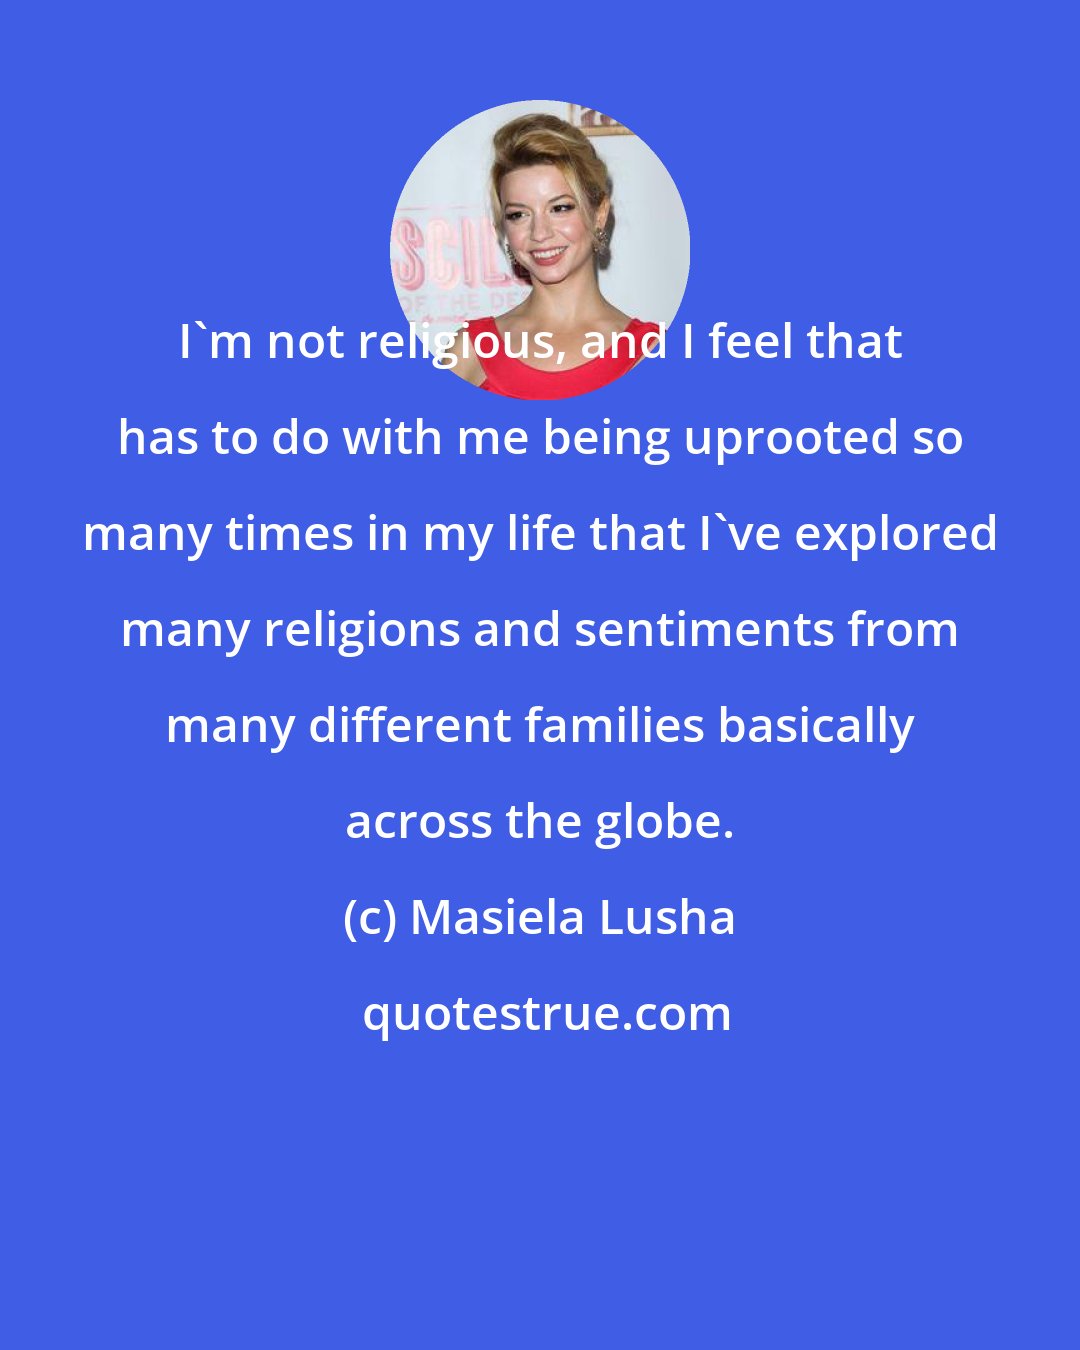 Masiela Lusha: I'm not religious, and I feel that has to do with me being uprooted so many times in my life that I've explored many religions and sentiments from many different families basically across the globe.